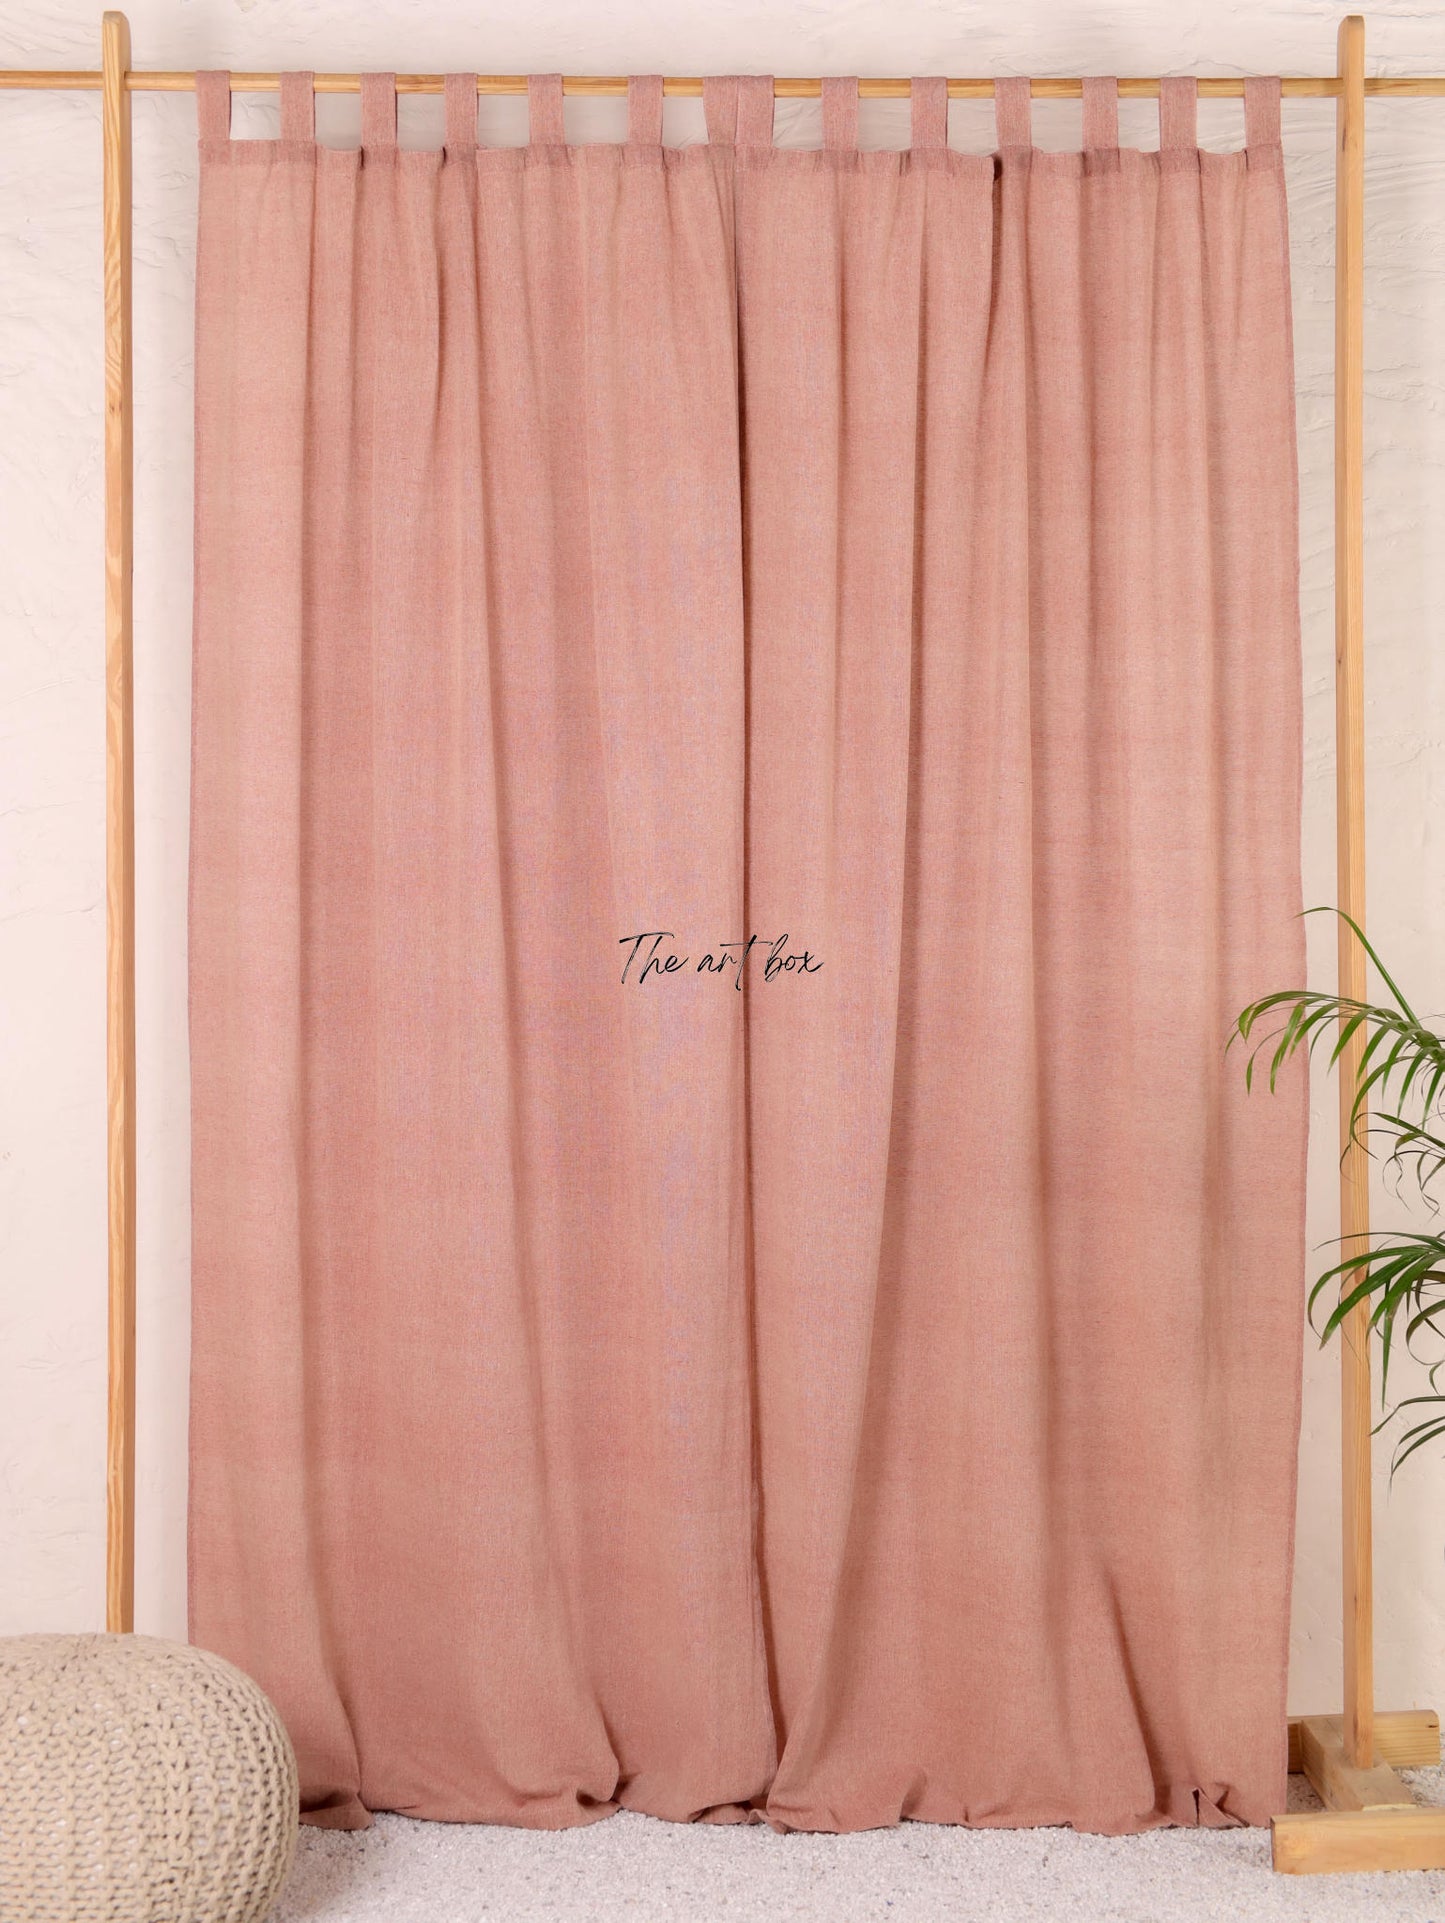 Linen Gauze with Maroon Stripes Curtains- 2 Panel set